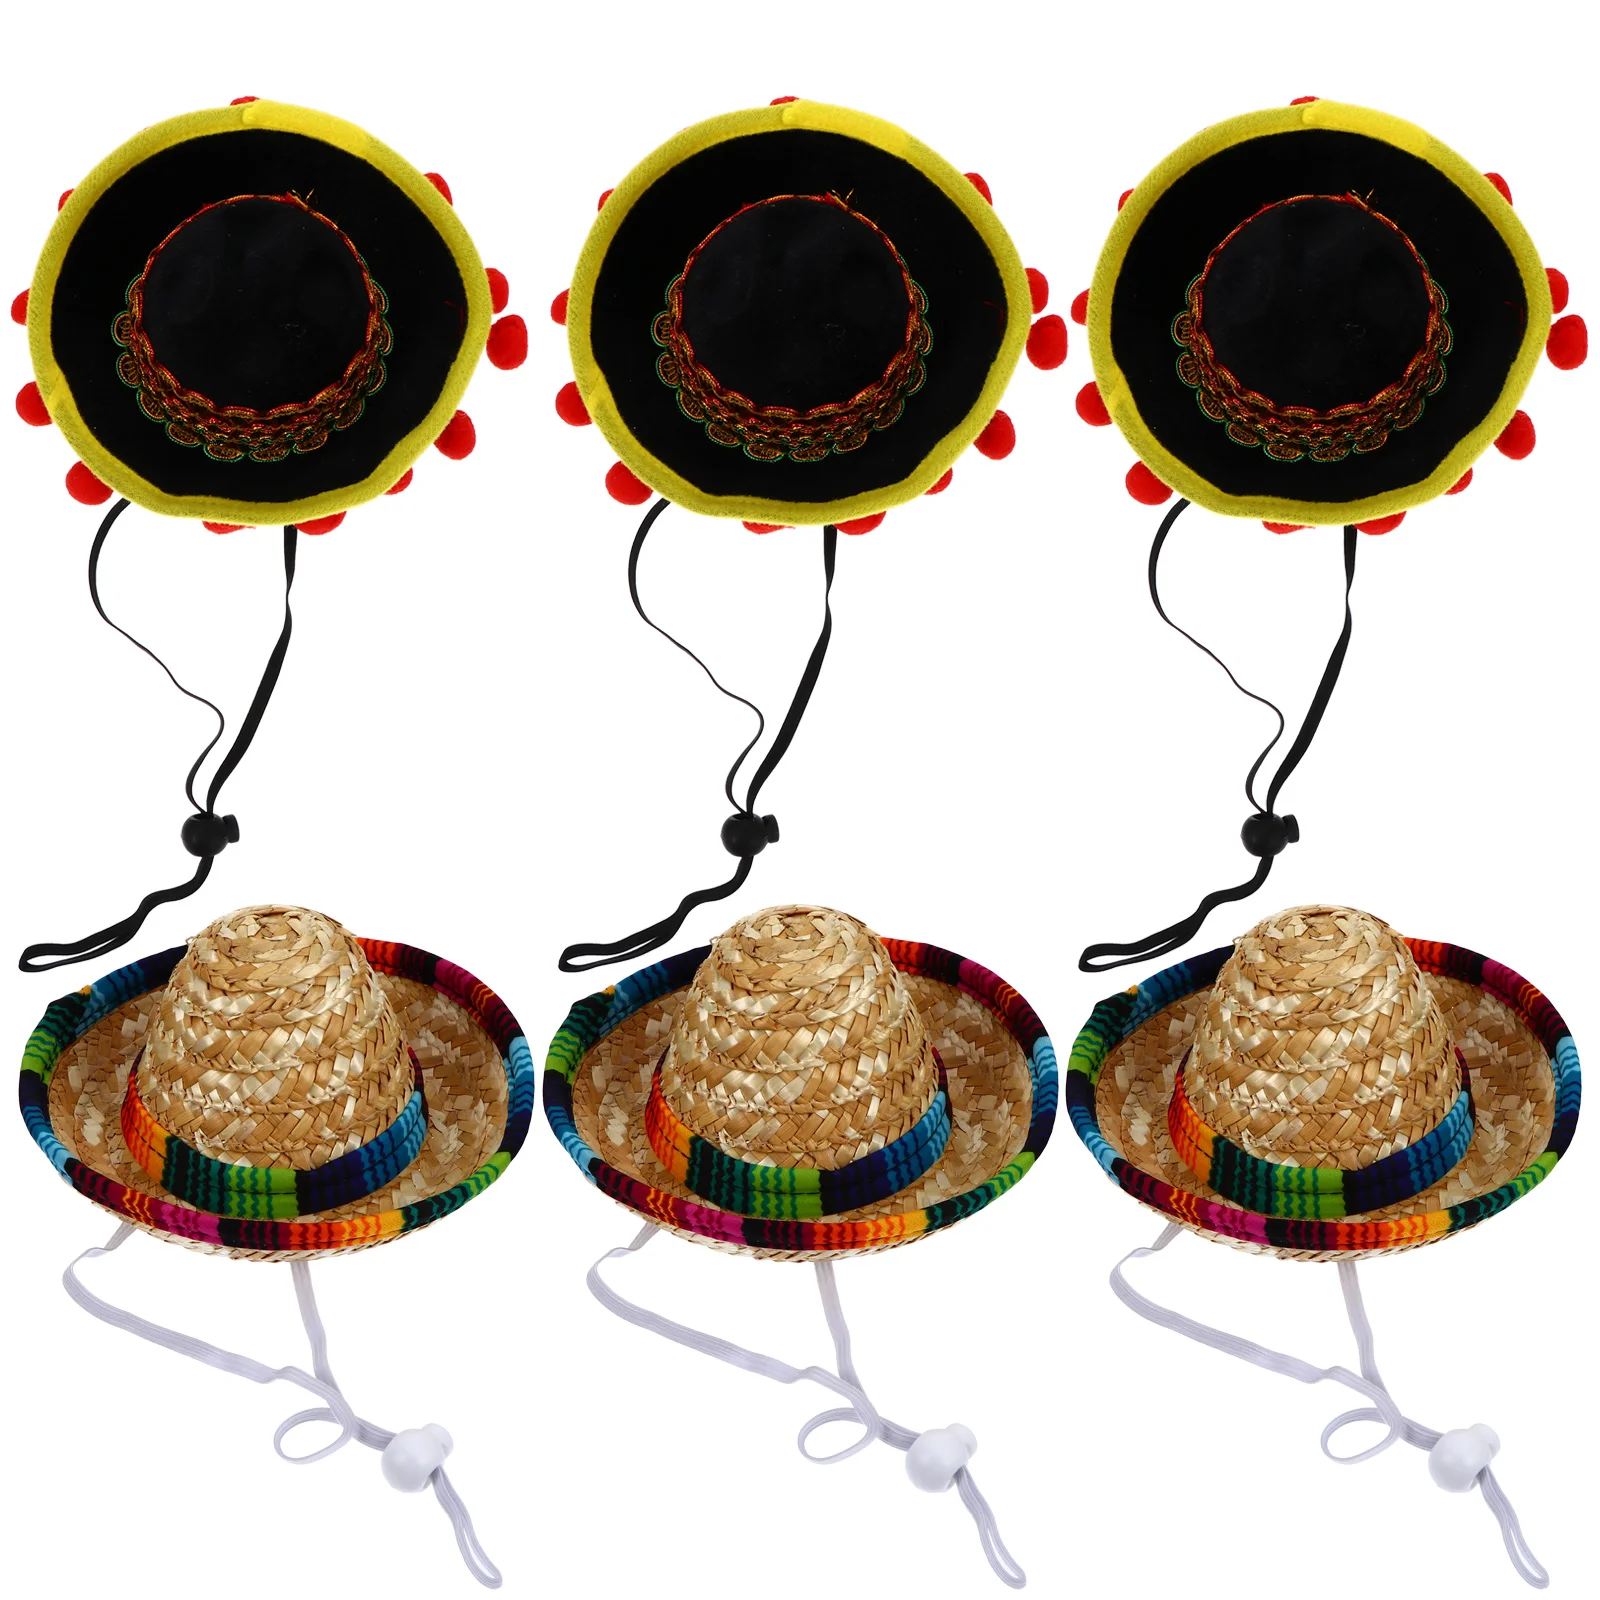 

6 Pcs Halloween Ornaments Mexican Hat Party Hats Pets Mini Round Adorable Lovely Cap Miss